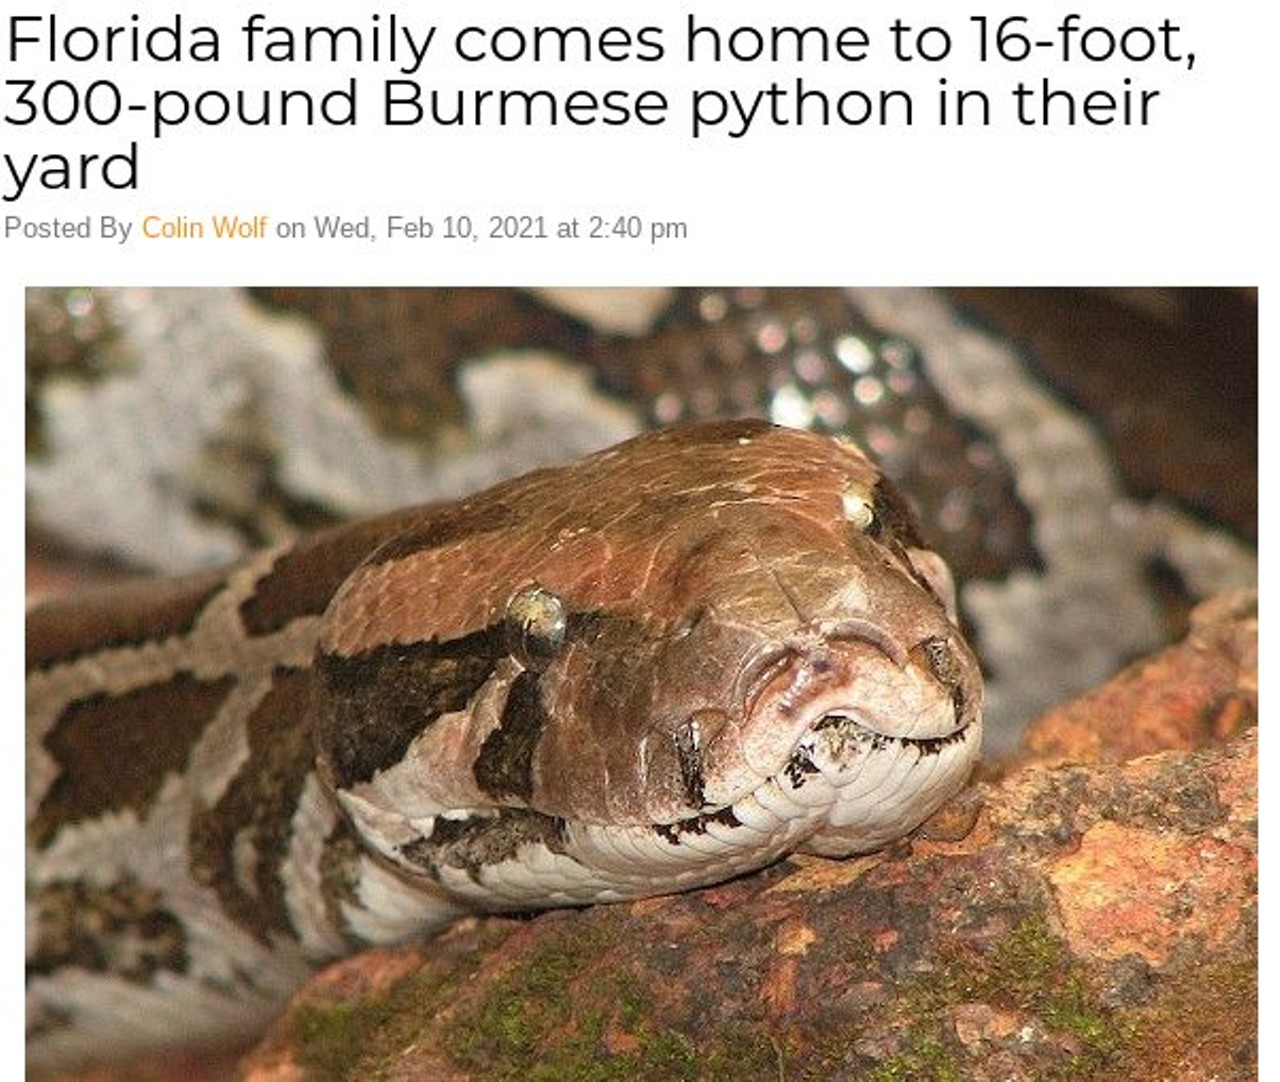 Florida family comes home to 16-foot, 300-pound Burmese python in their yard
